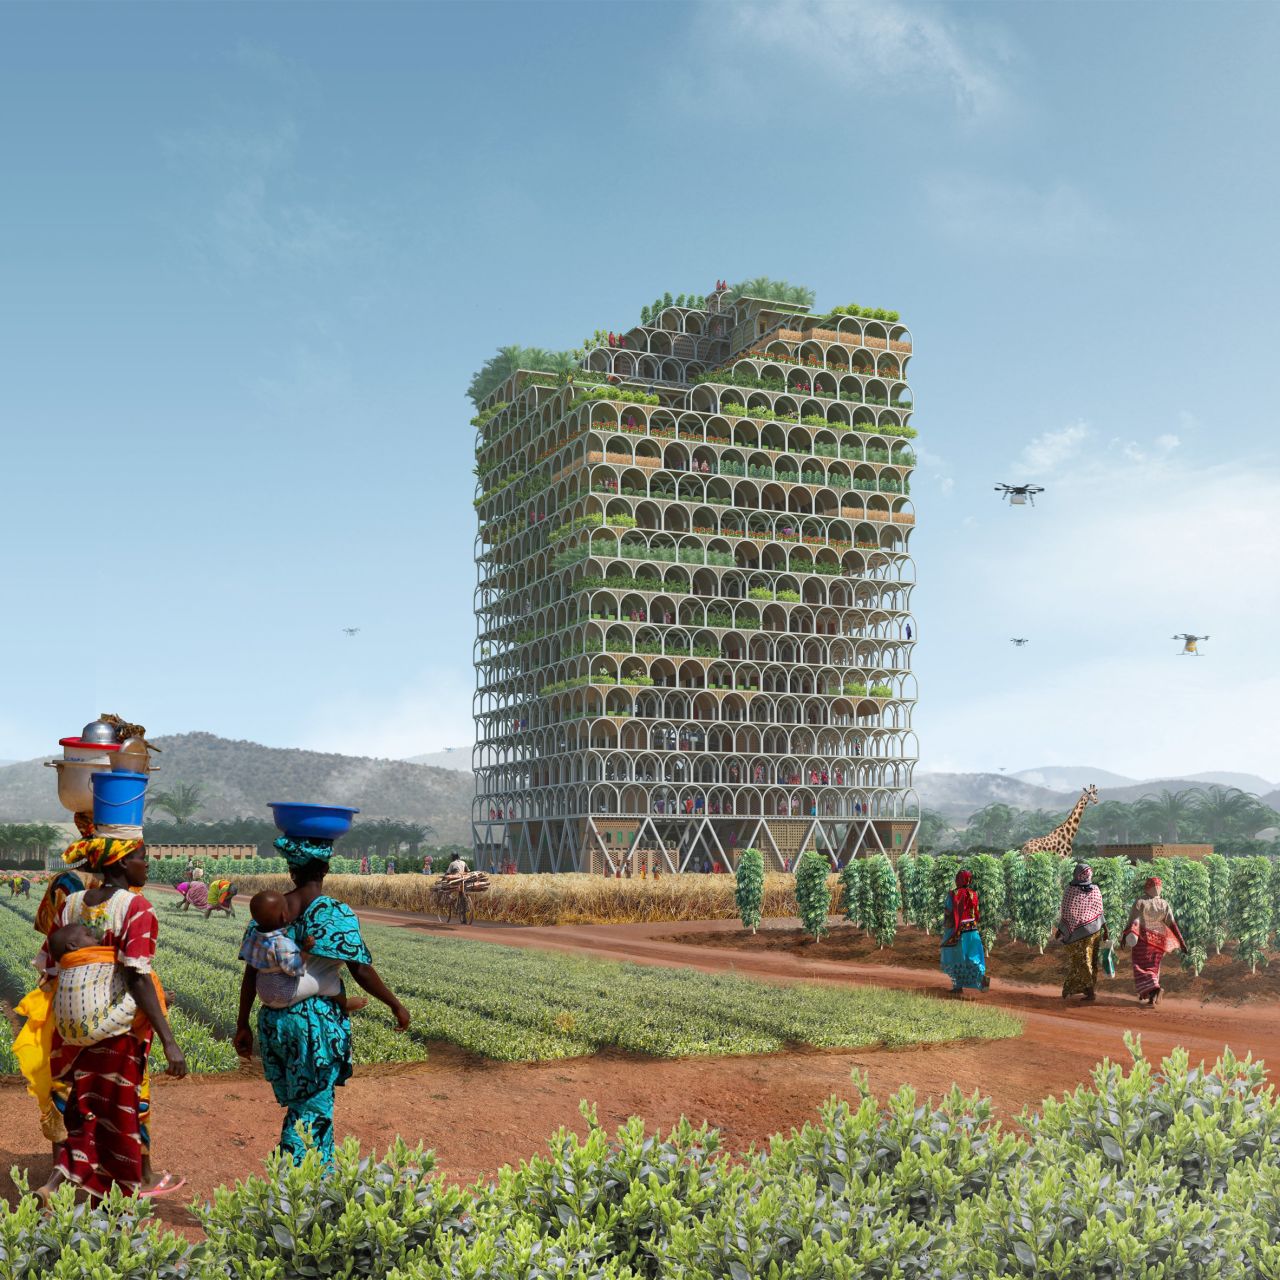 Pawel Lipiński and Mateusz Frankowski's design for a modular skyscraper called Mashambas, which means "cultivated land" in Swahili